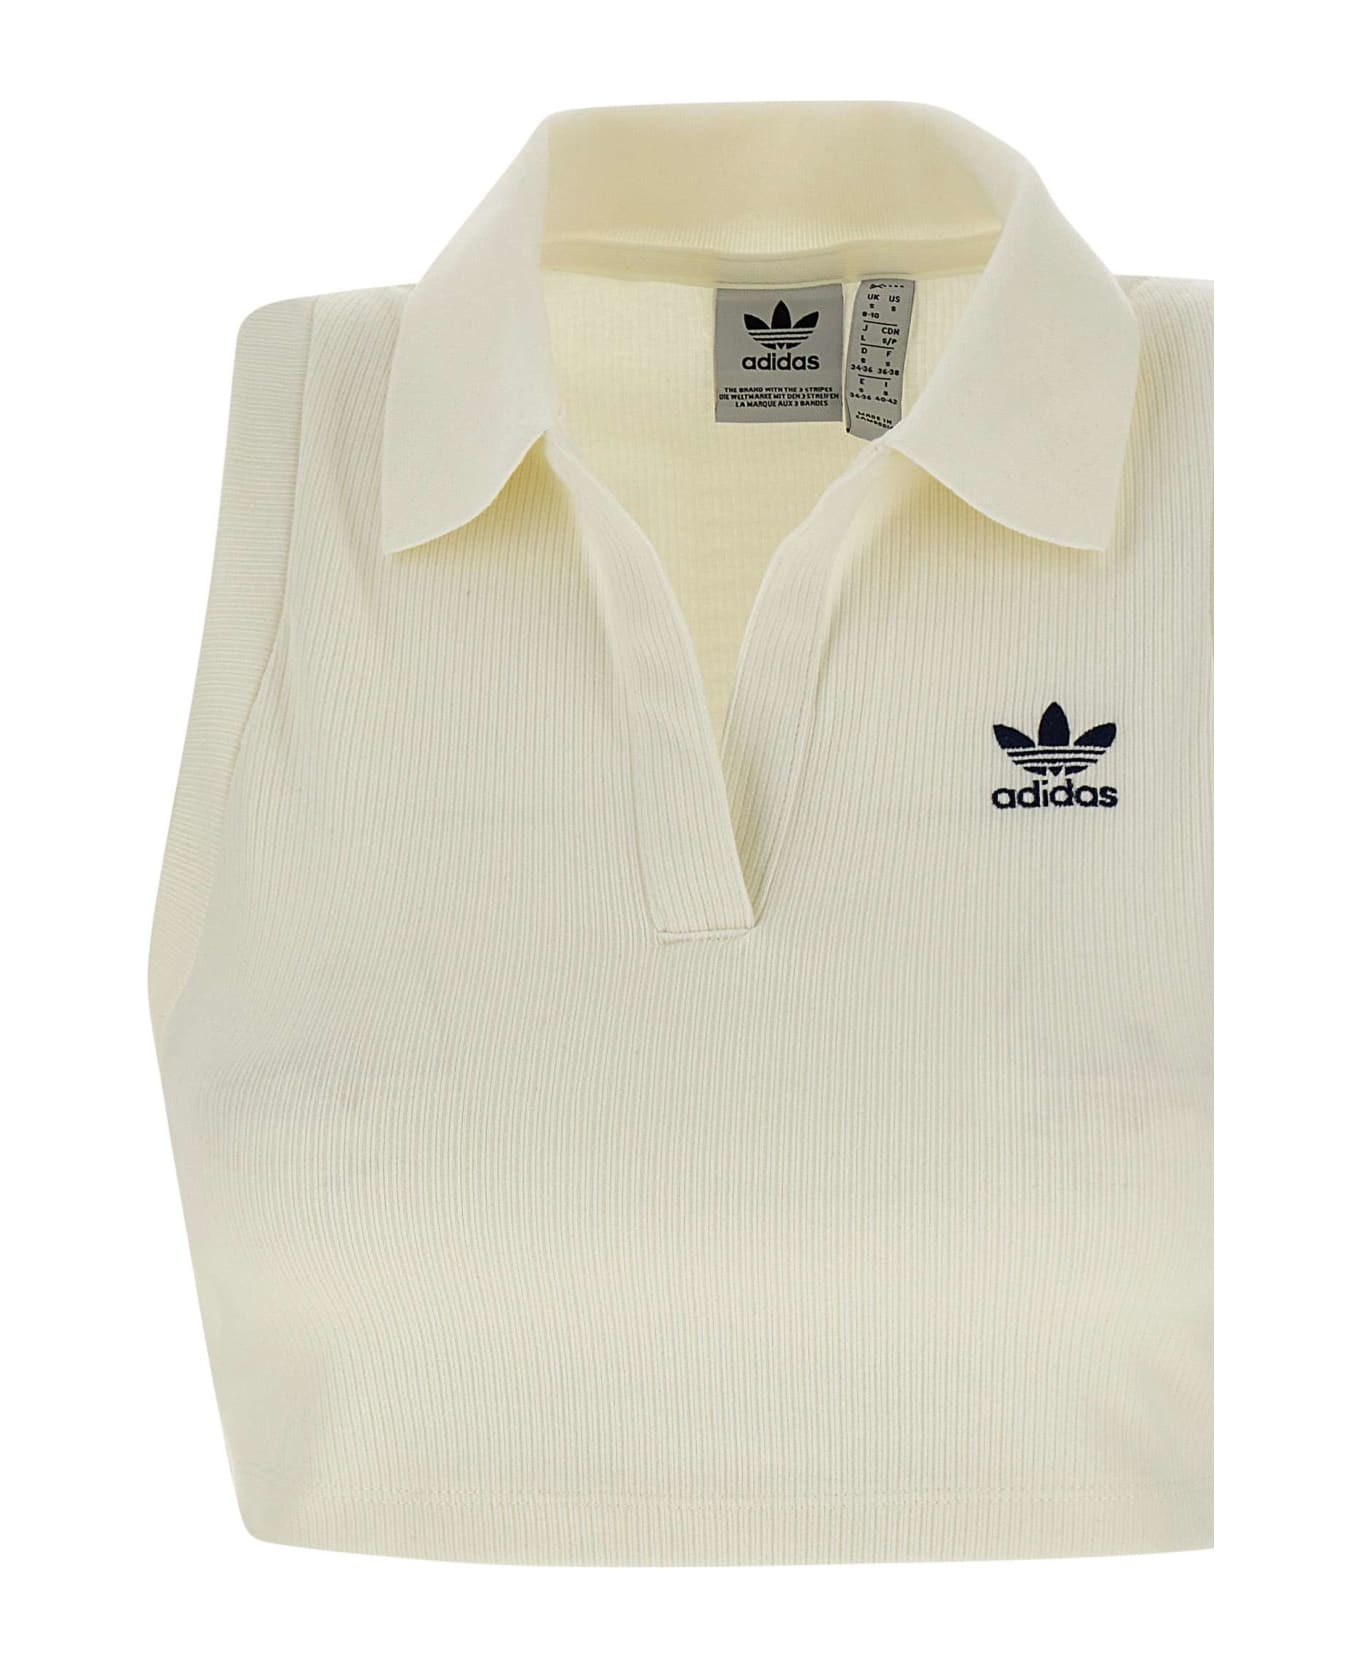 Adidas Cotton And Viscose Top - WHITE トップス